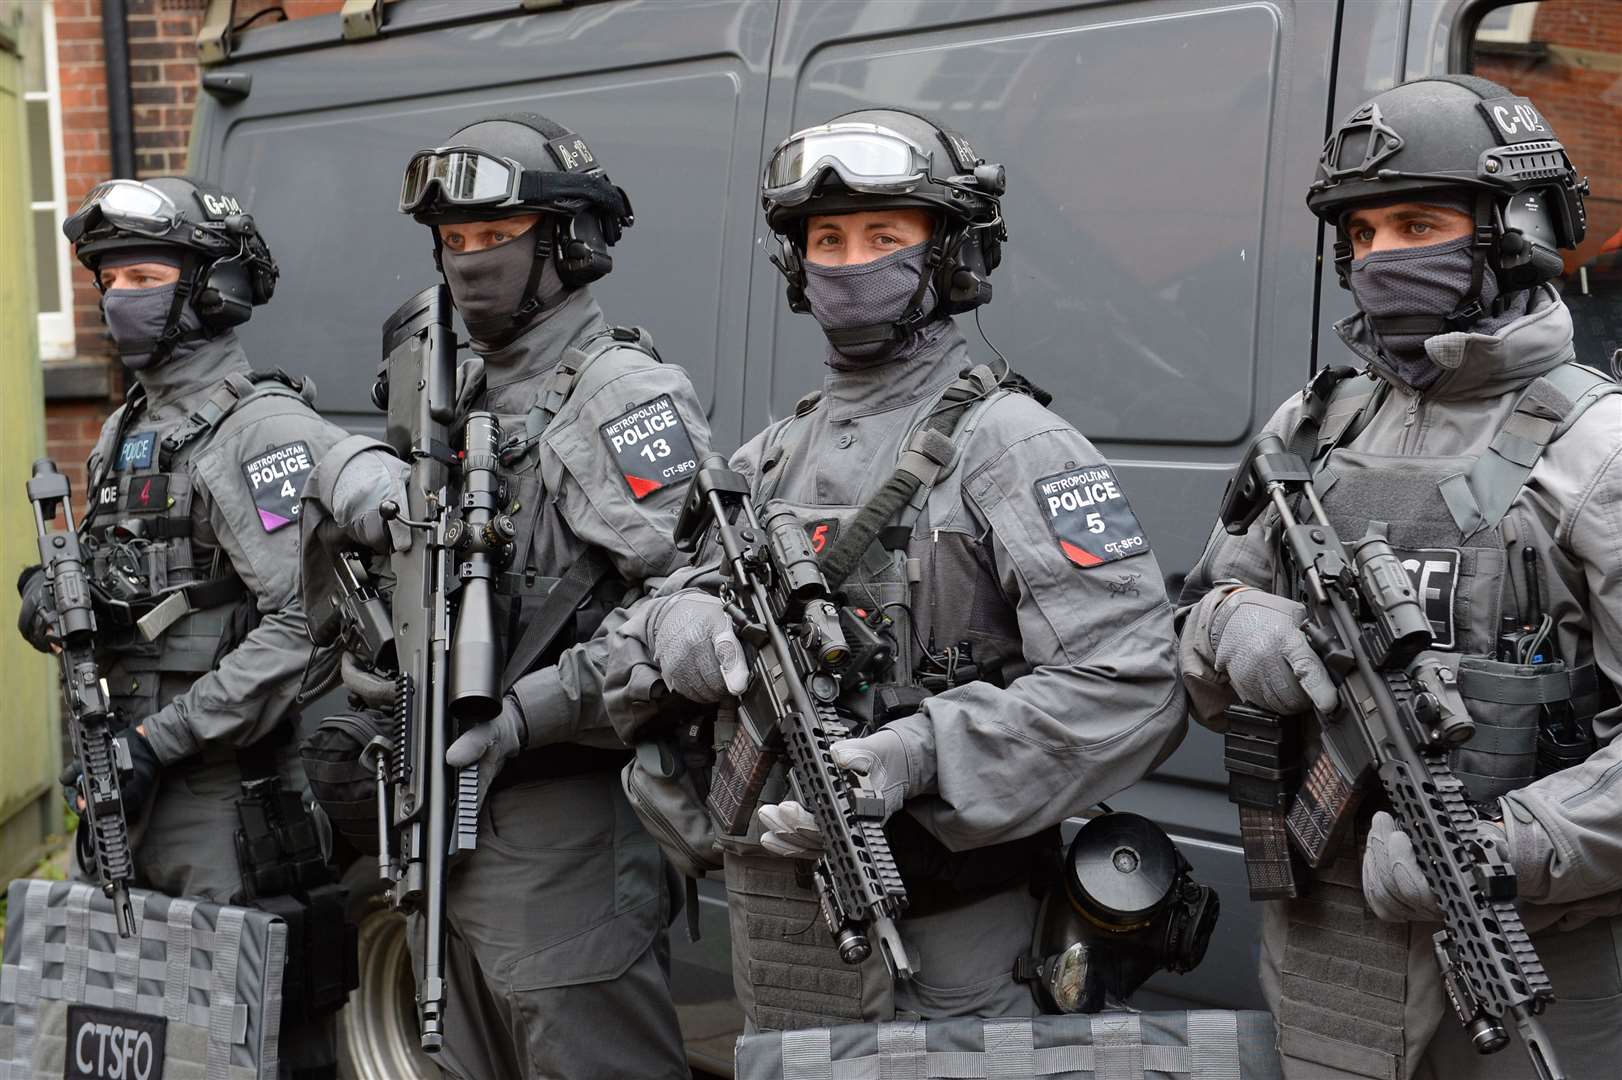 Counter-terrorist firearms officers will be ready to respond if needed, Mr Aitch said (Stefan Rousseau/PA)